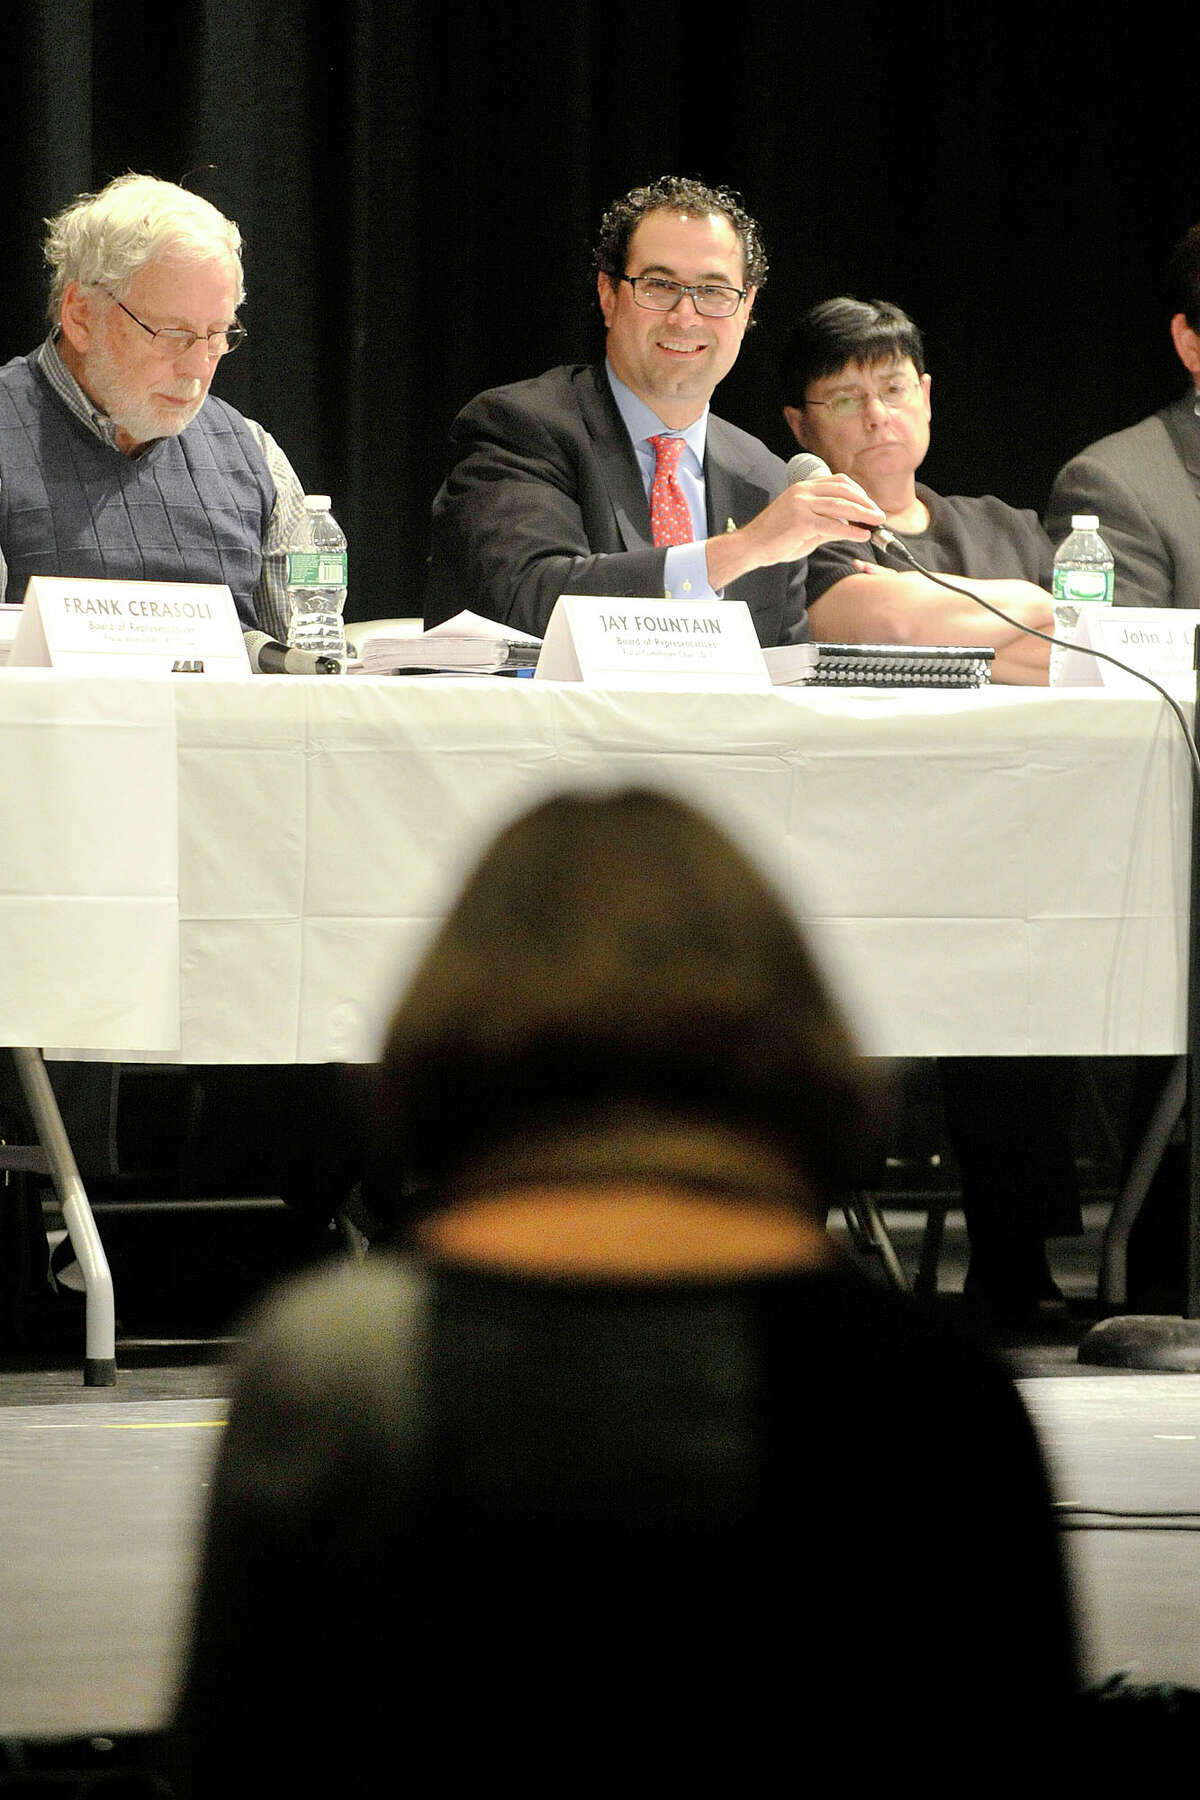 Deborah Golden, foreground, speaks as John Louizos, chairman of the Board of Finance, grabs the microphone during the public hearing on Mayor David Martin's proposed budget before the Board of Finance and Board of Representatives at Westhill High School in Stamford, Conn., on Thursday, March 27, 2014.